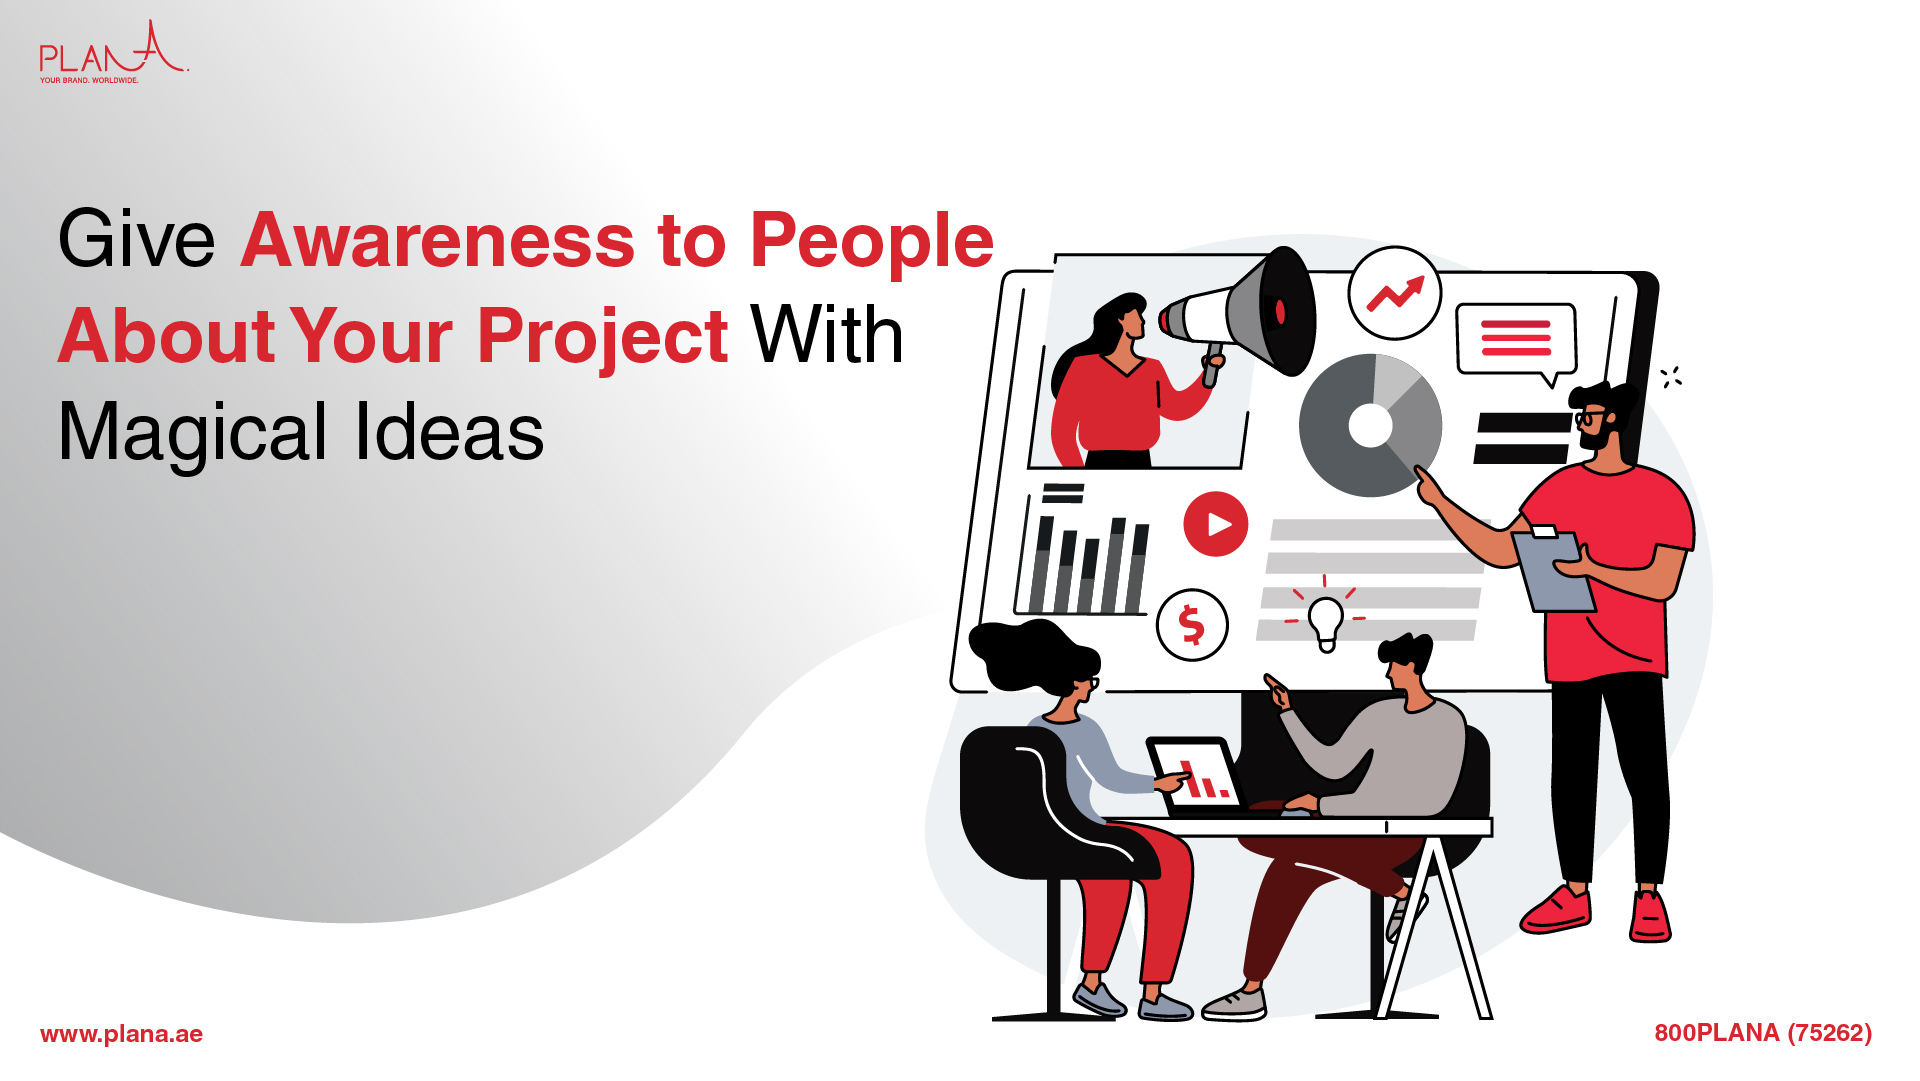 Give Awareness to People About Your Project With Magical Ideas